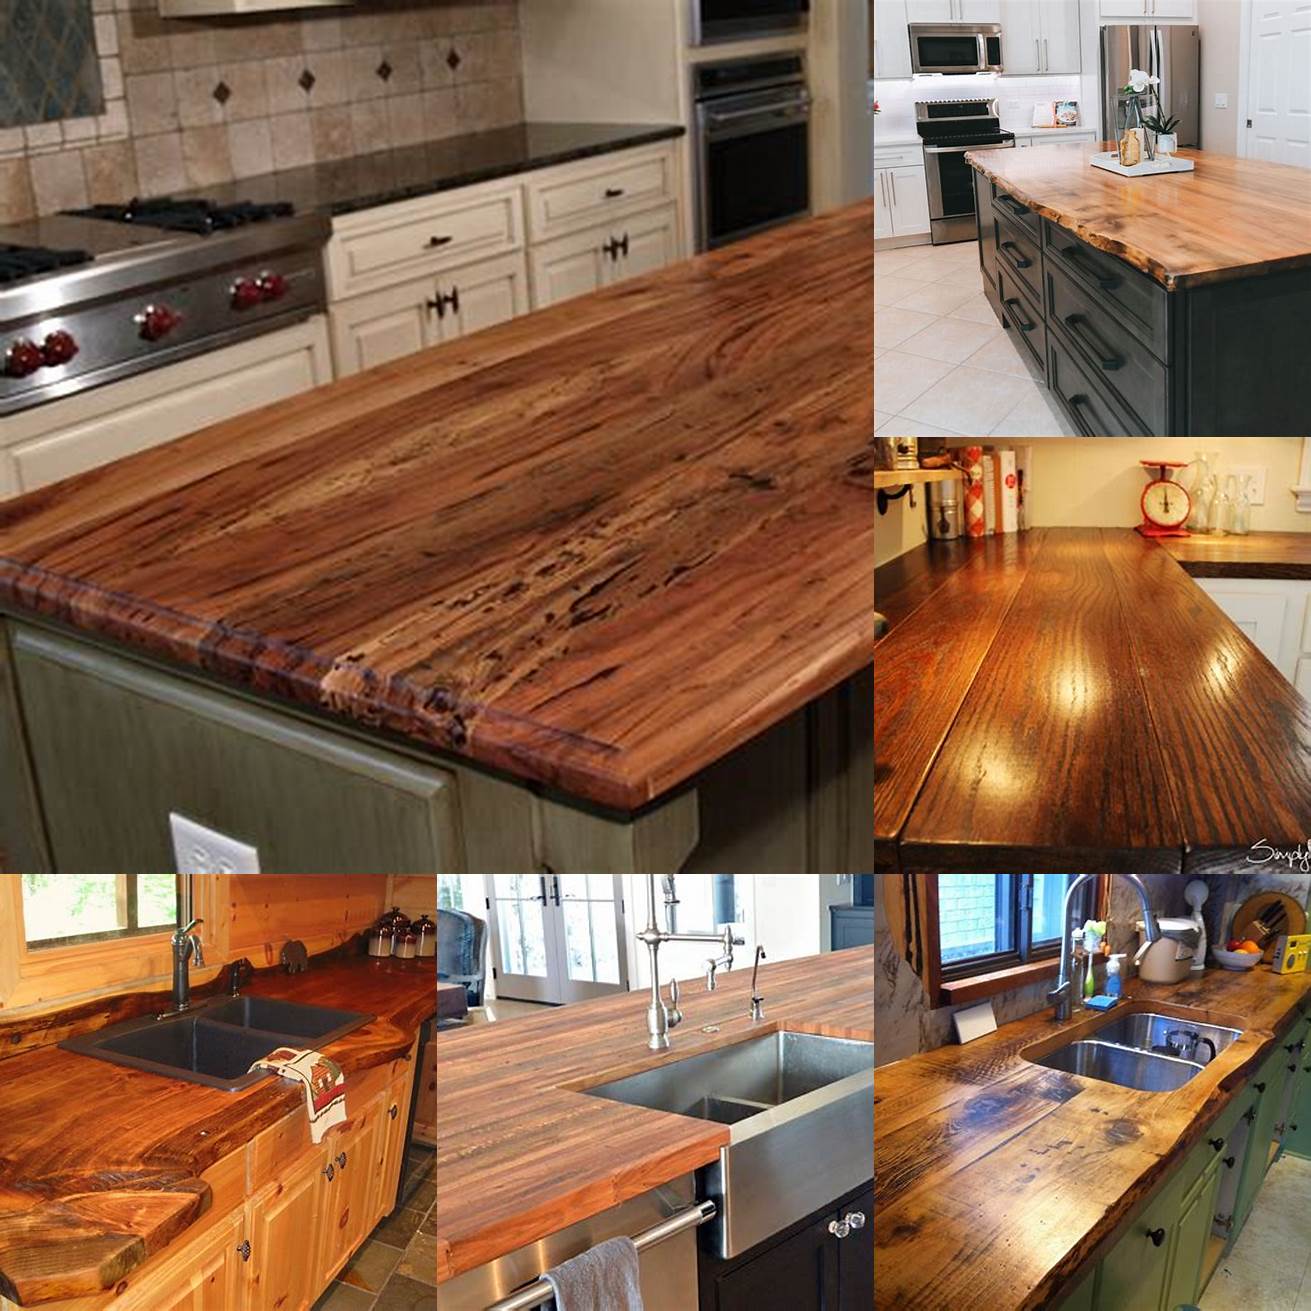 httpswwwexamplecomwood-countertop-eco-friendly-image